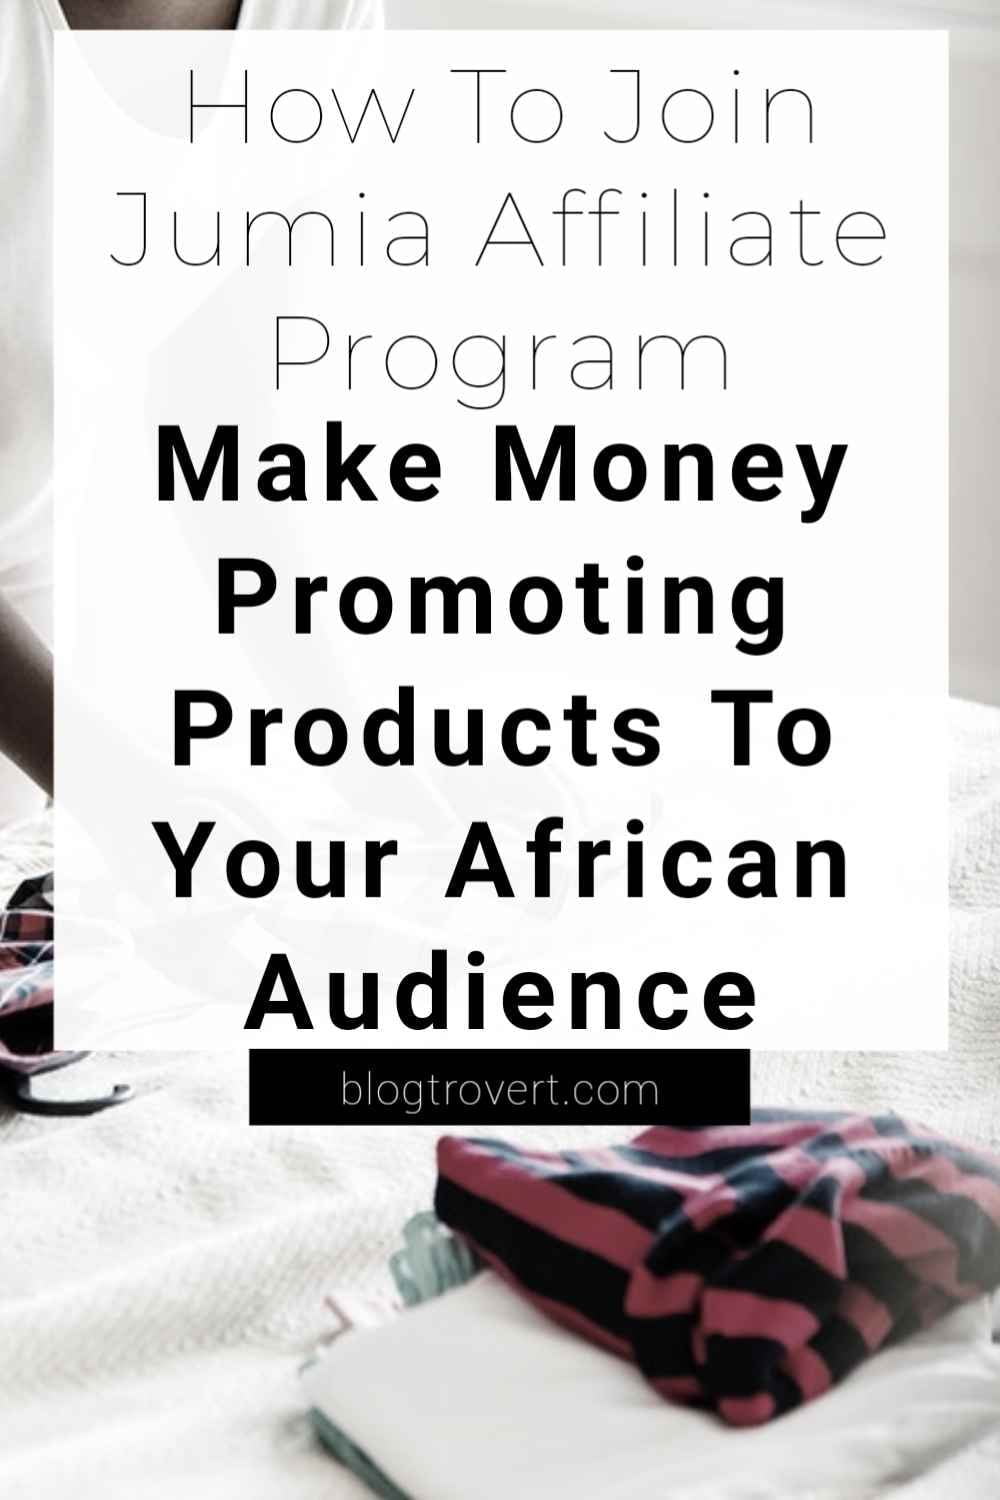 How To Join The Jumia Affiliate Program - Get Paid To Promote Products 3